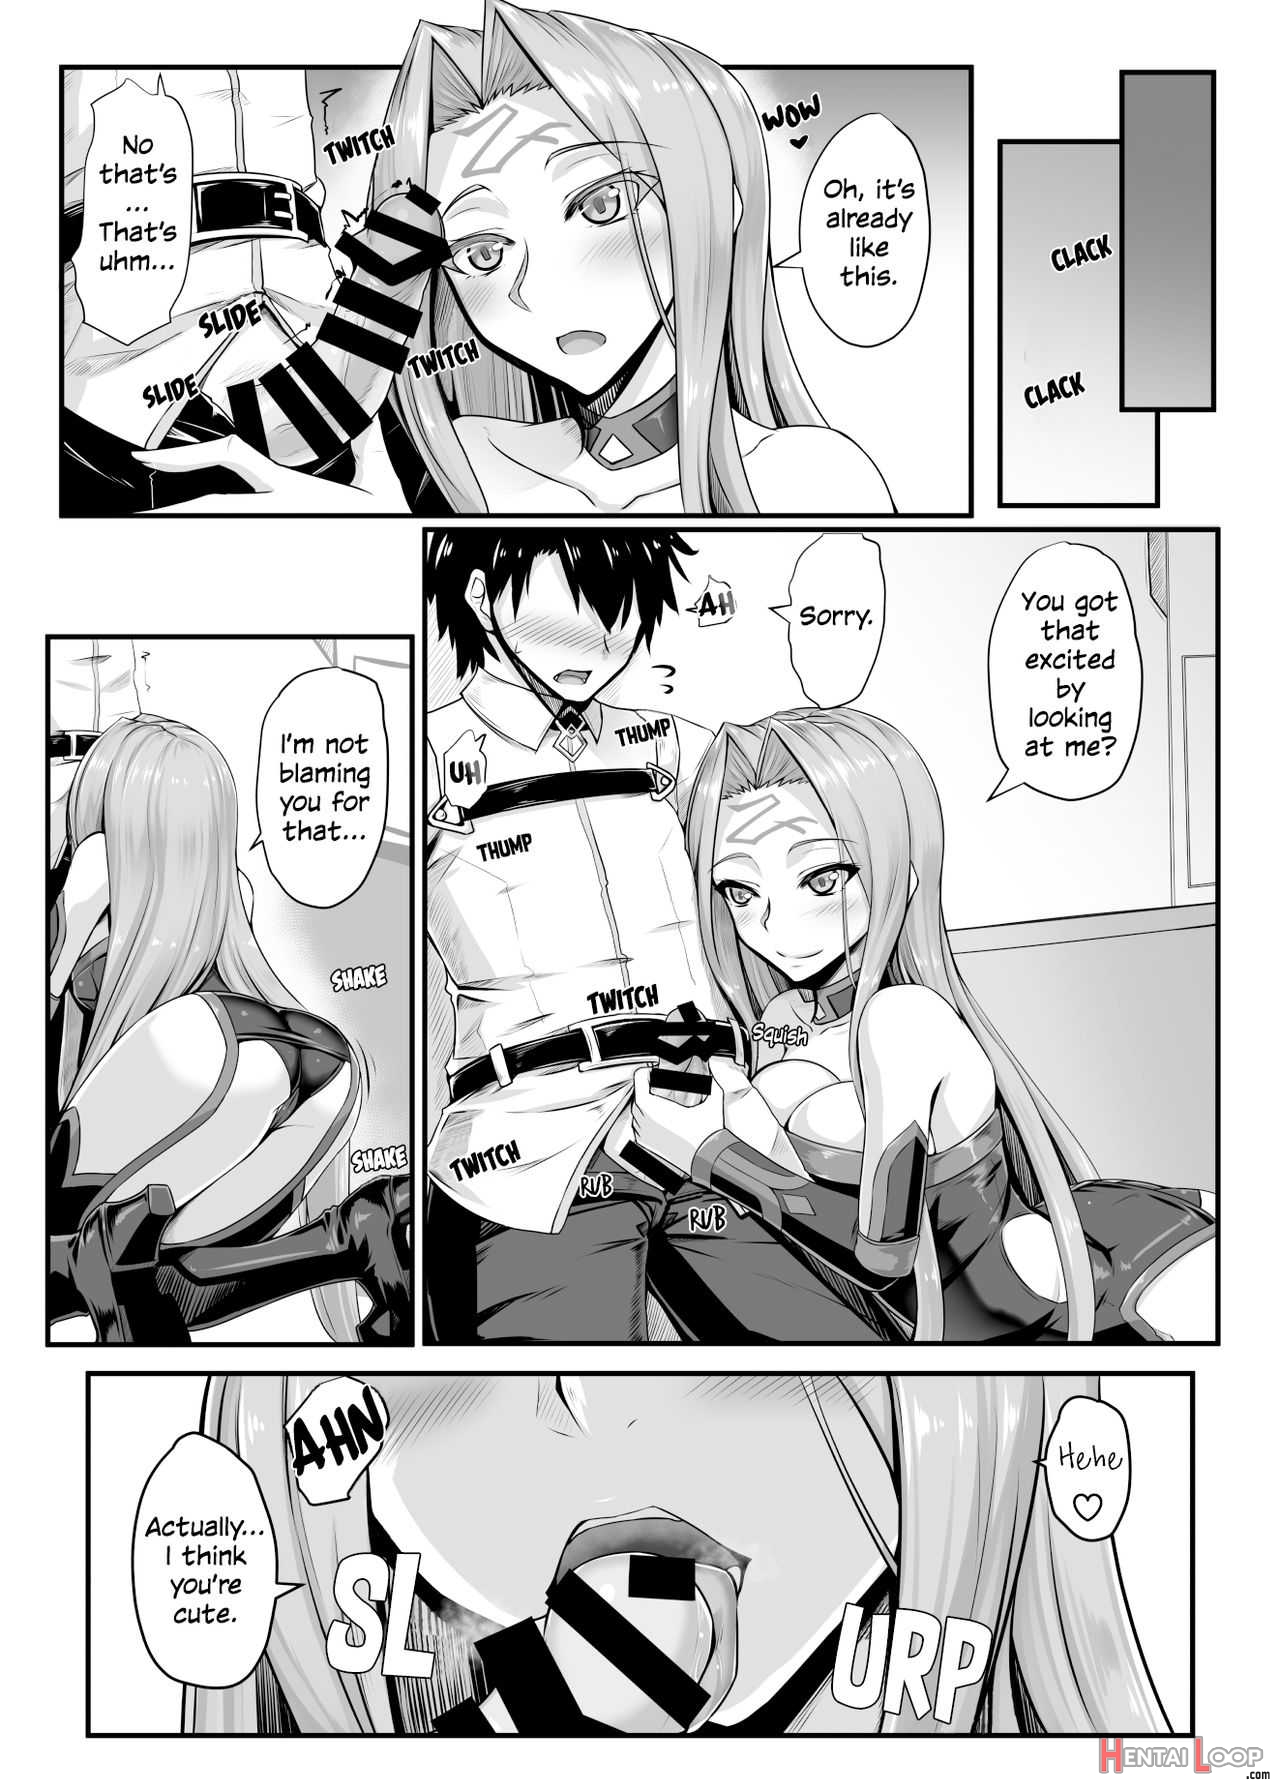 Max Bonding With Rider page 5